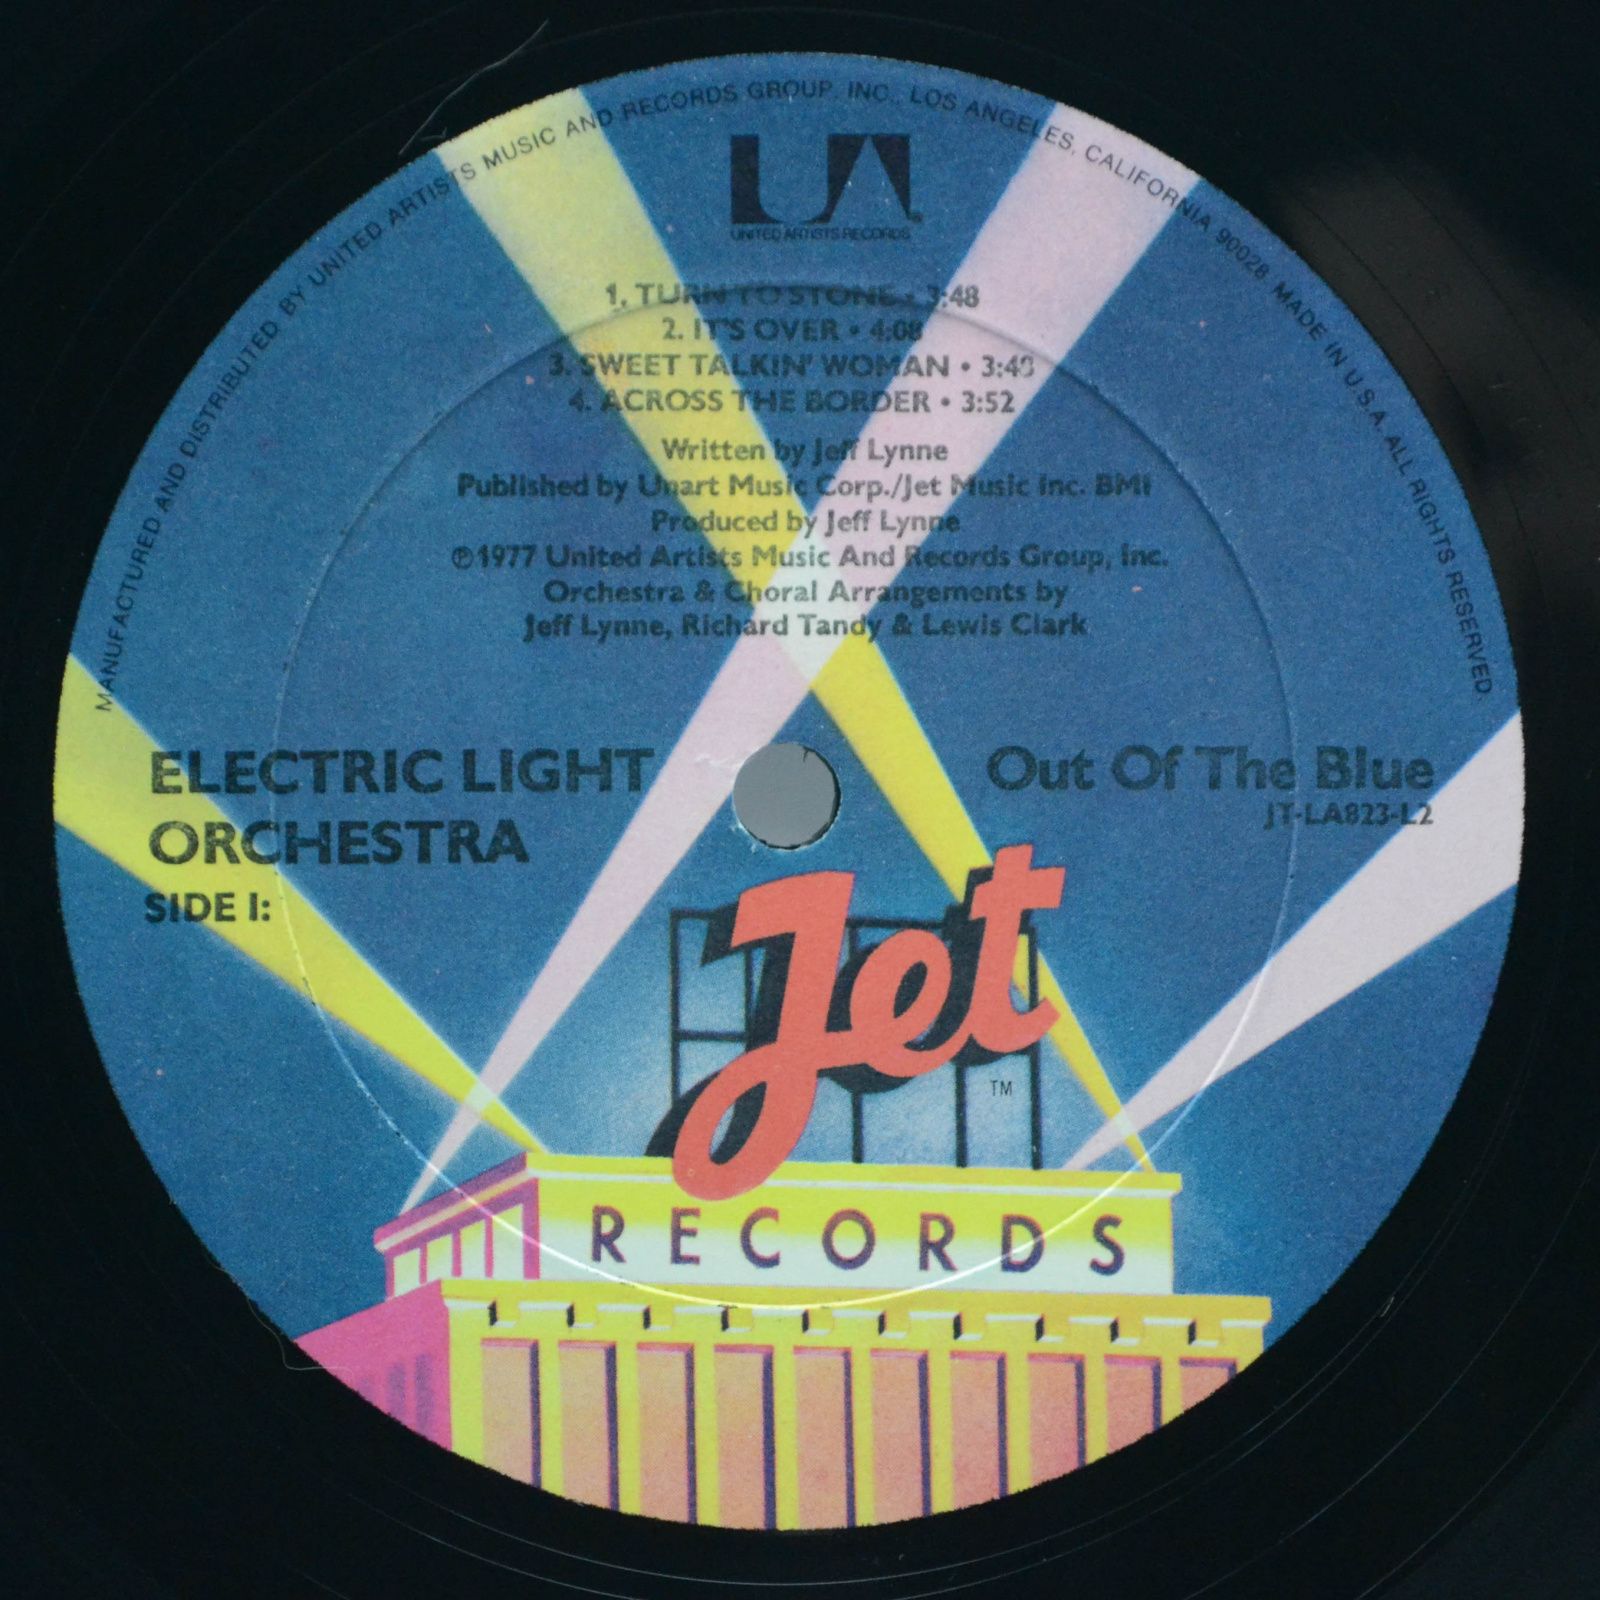 Electric Light Orchestra — Out Of The Blue (2LP, USA, poster), 1977